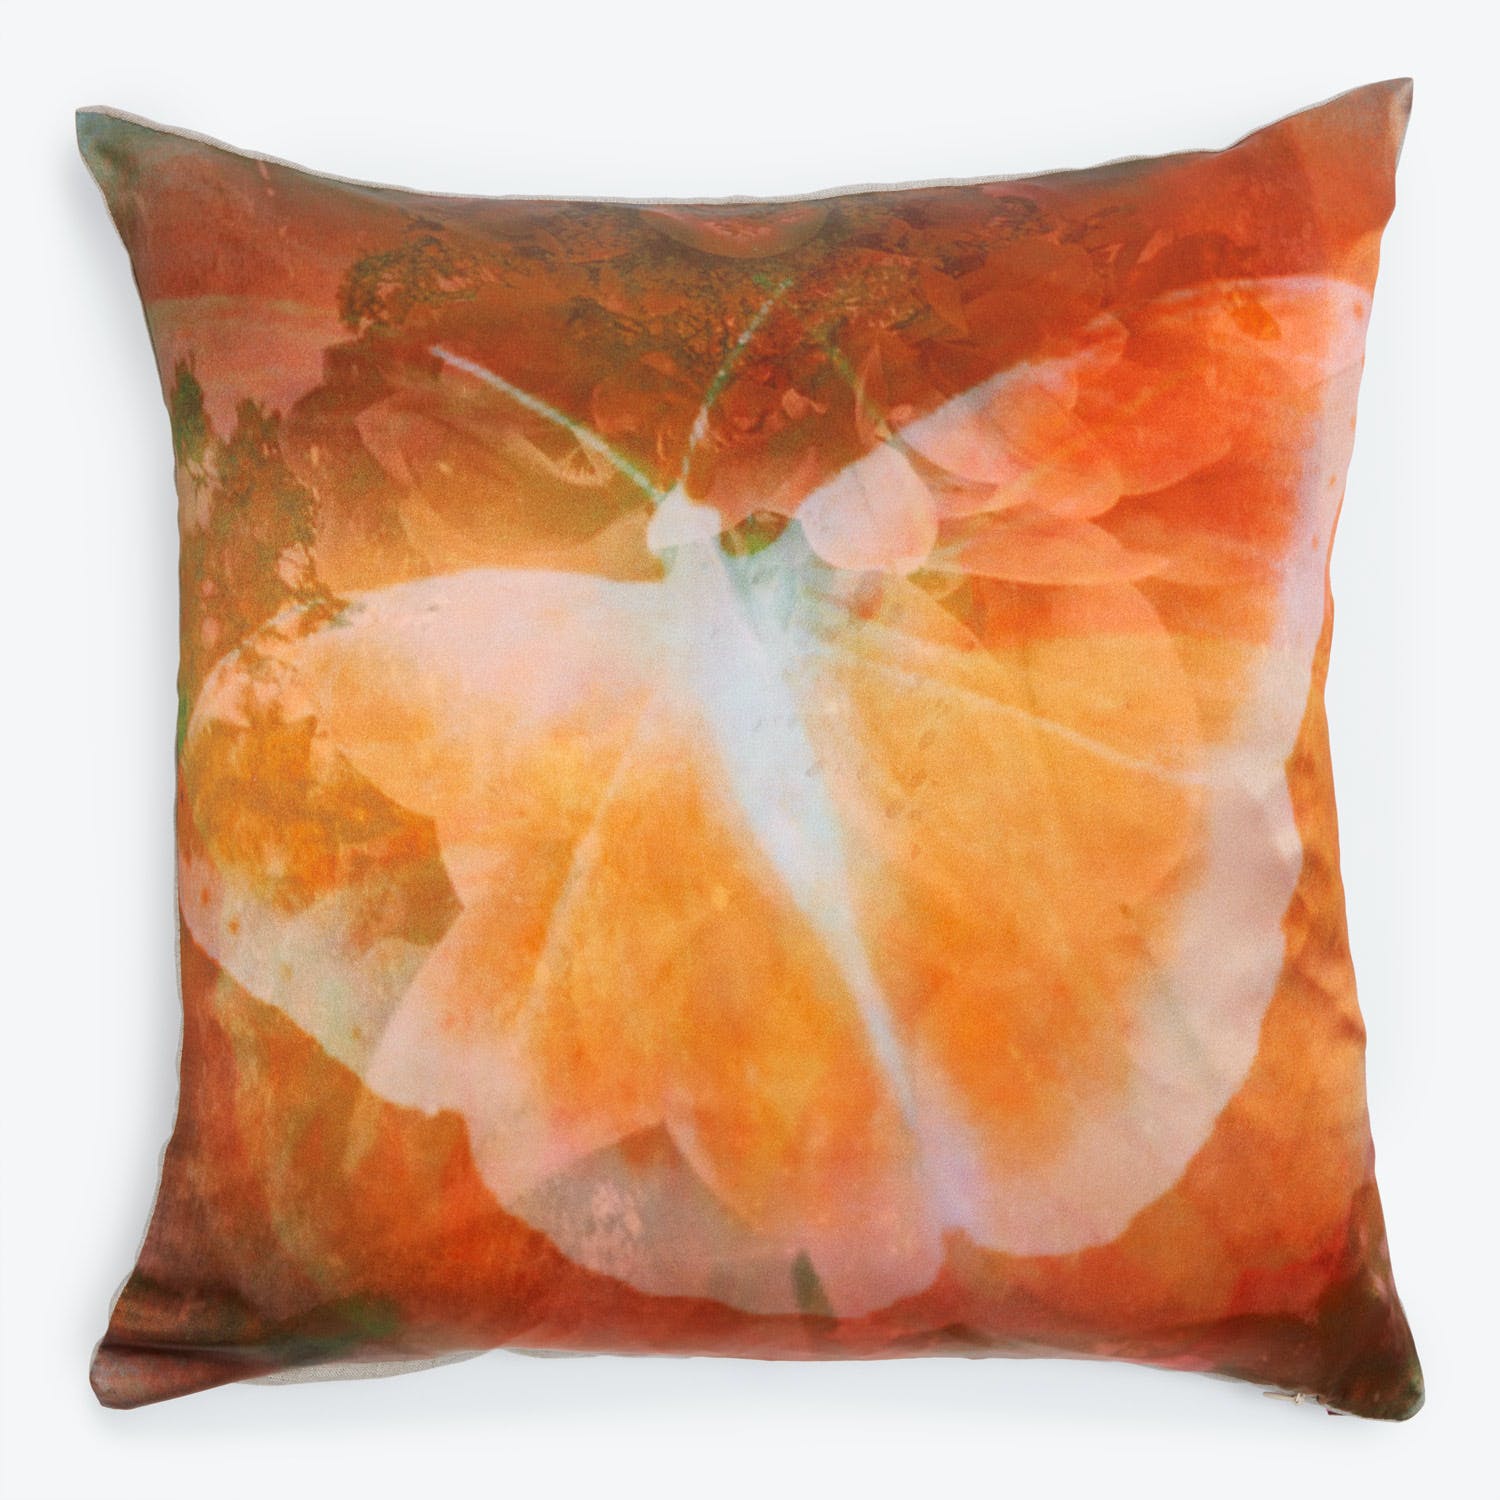 Vibrant floral pillow with soft fabric and removable cover design